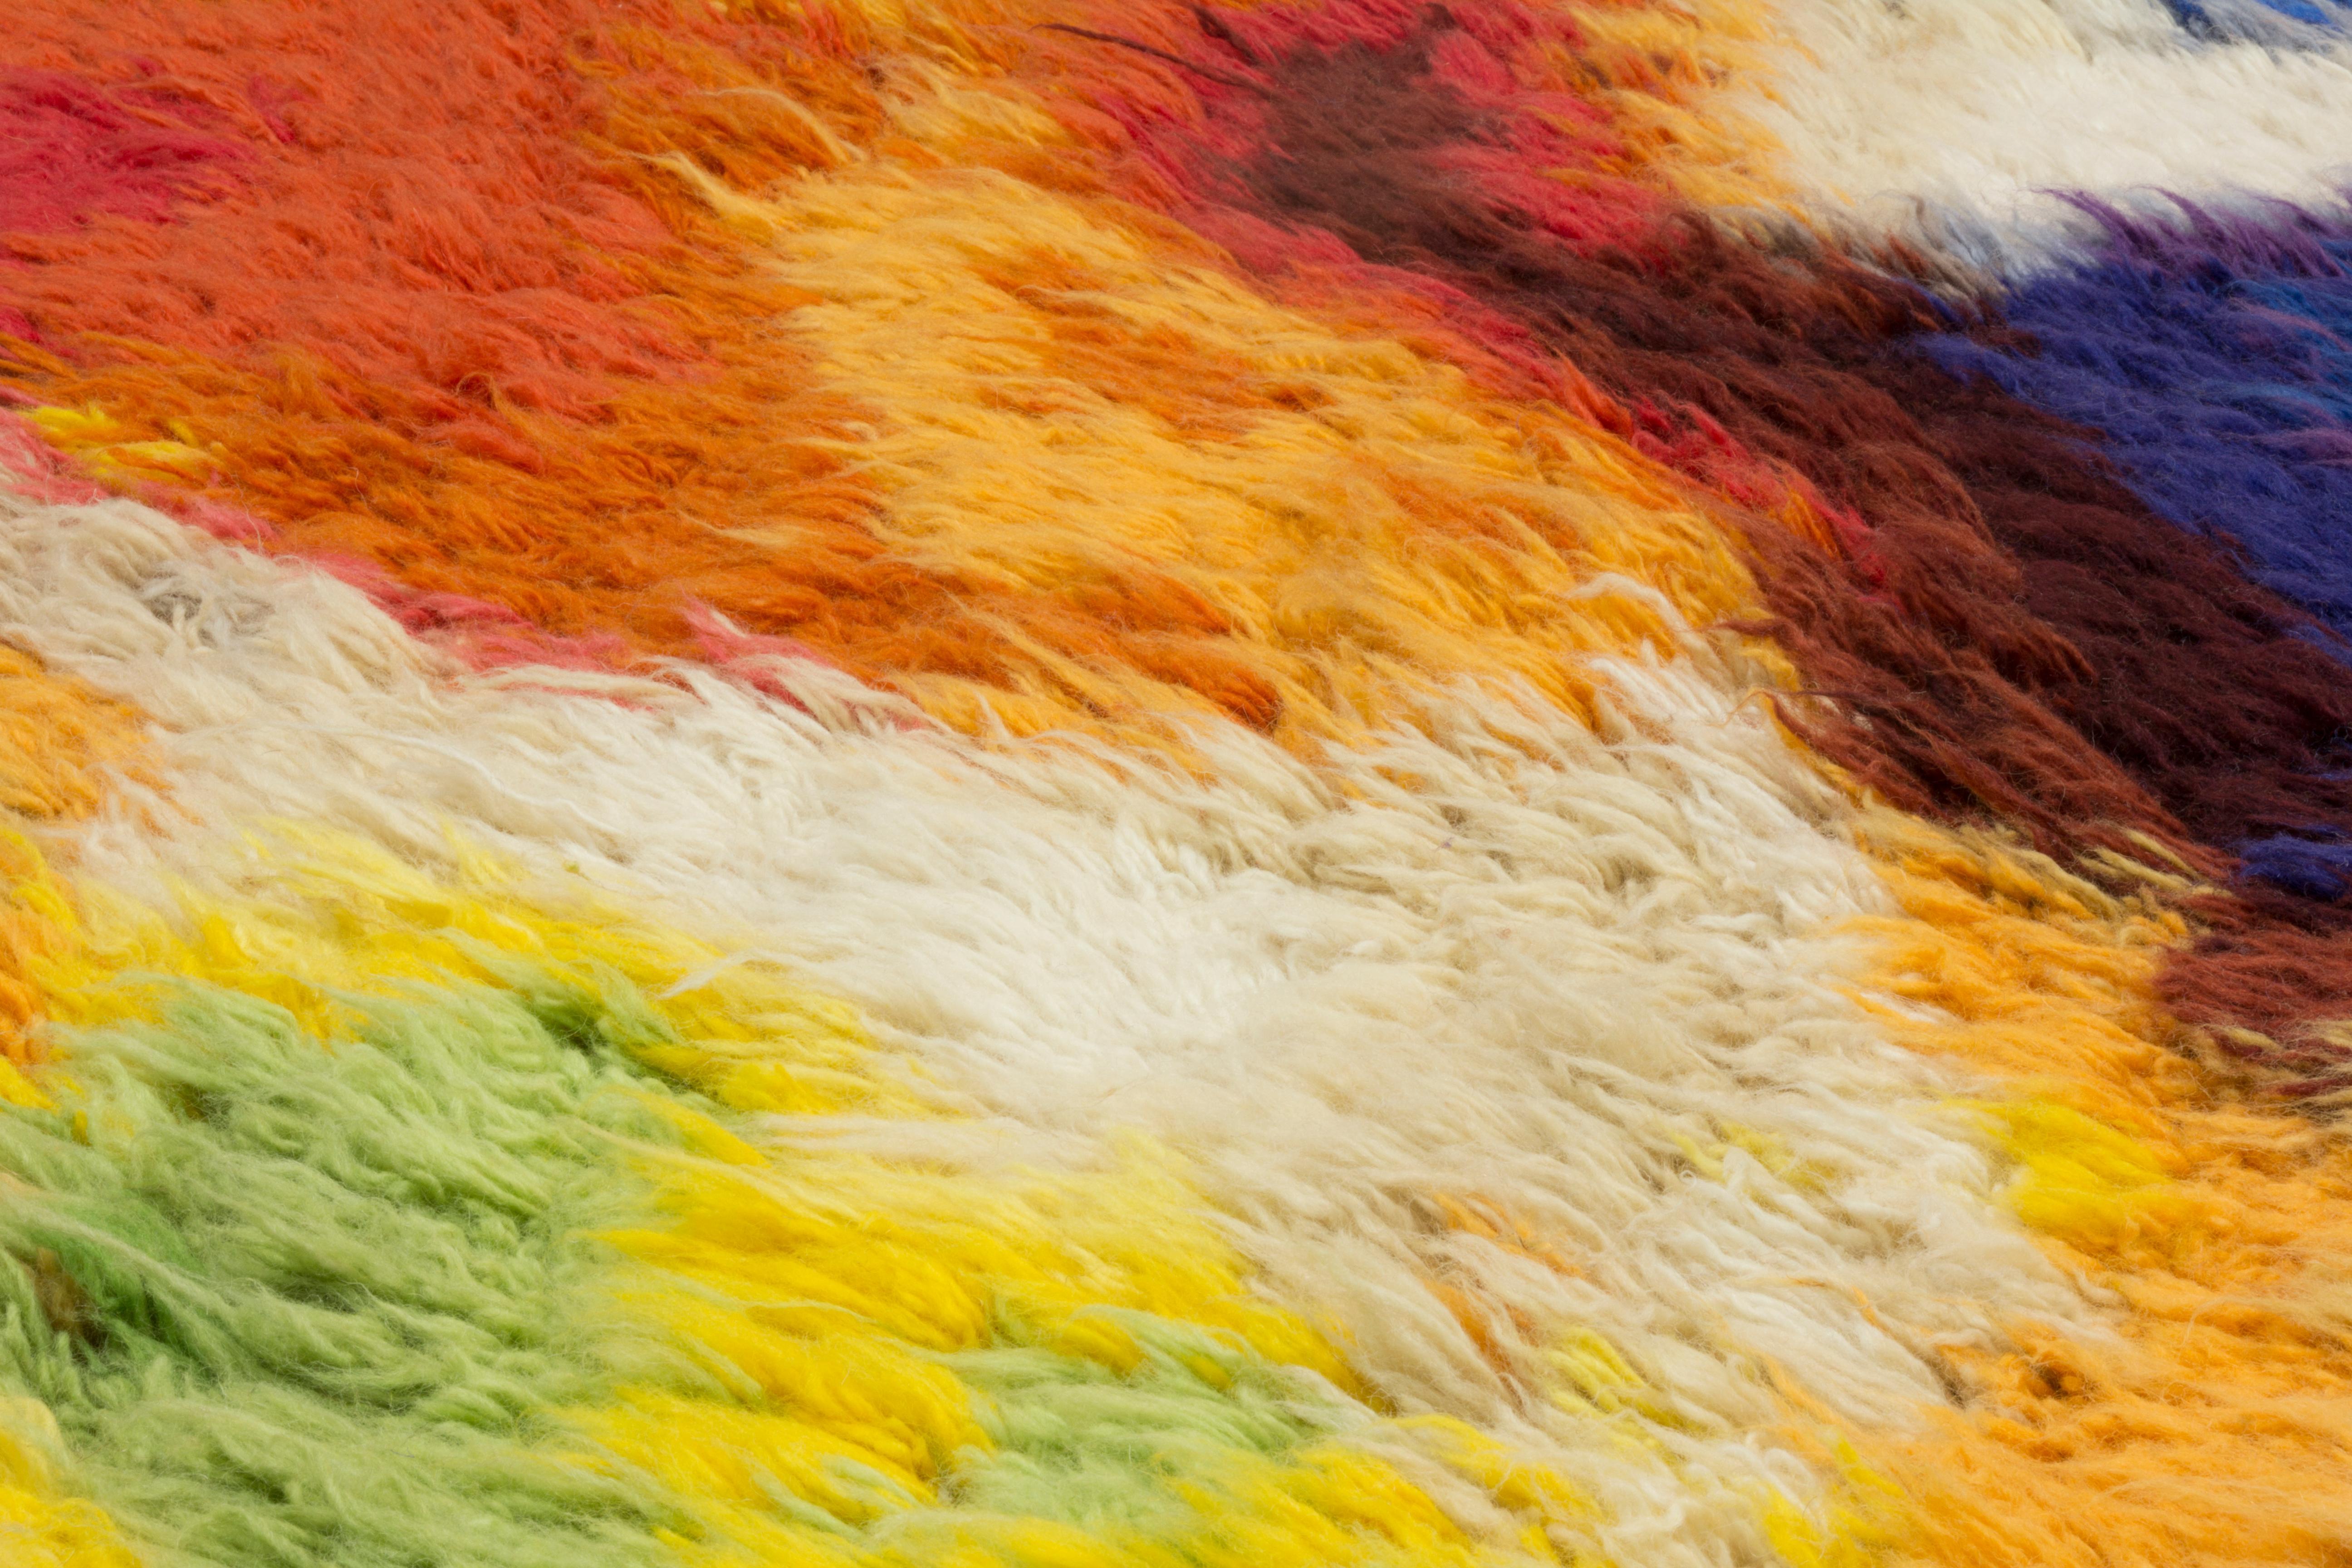 Hand knotted in the cc-tapis atelier in Kathmandu, Nepal. The rug is made with a cotton weave, Himalayan wool, silk and metallic fibre coming from the areas surrounding the atelier. Produced with the Moroccan loom technique. The sale of every rug